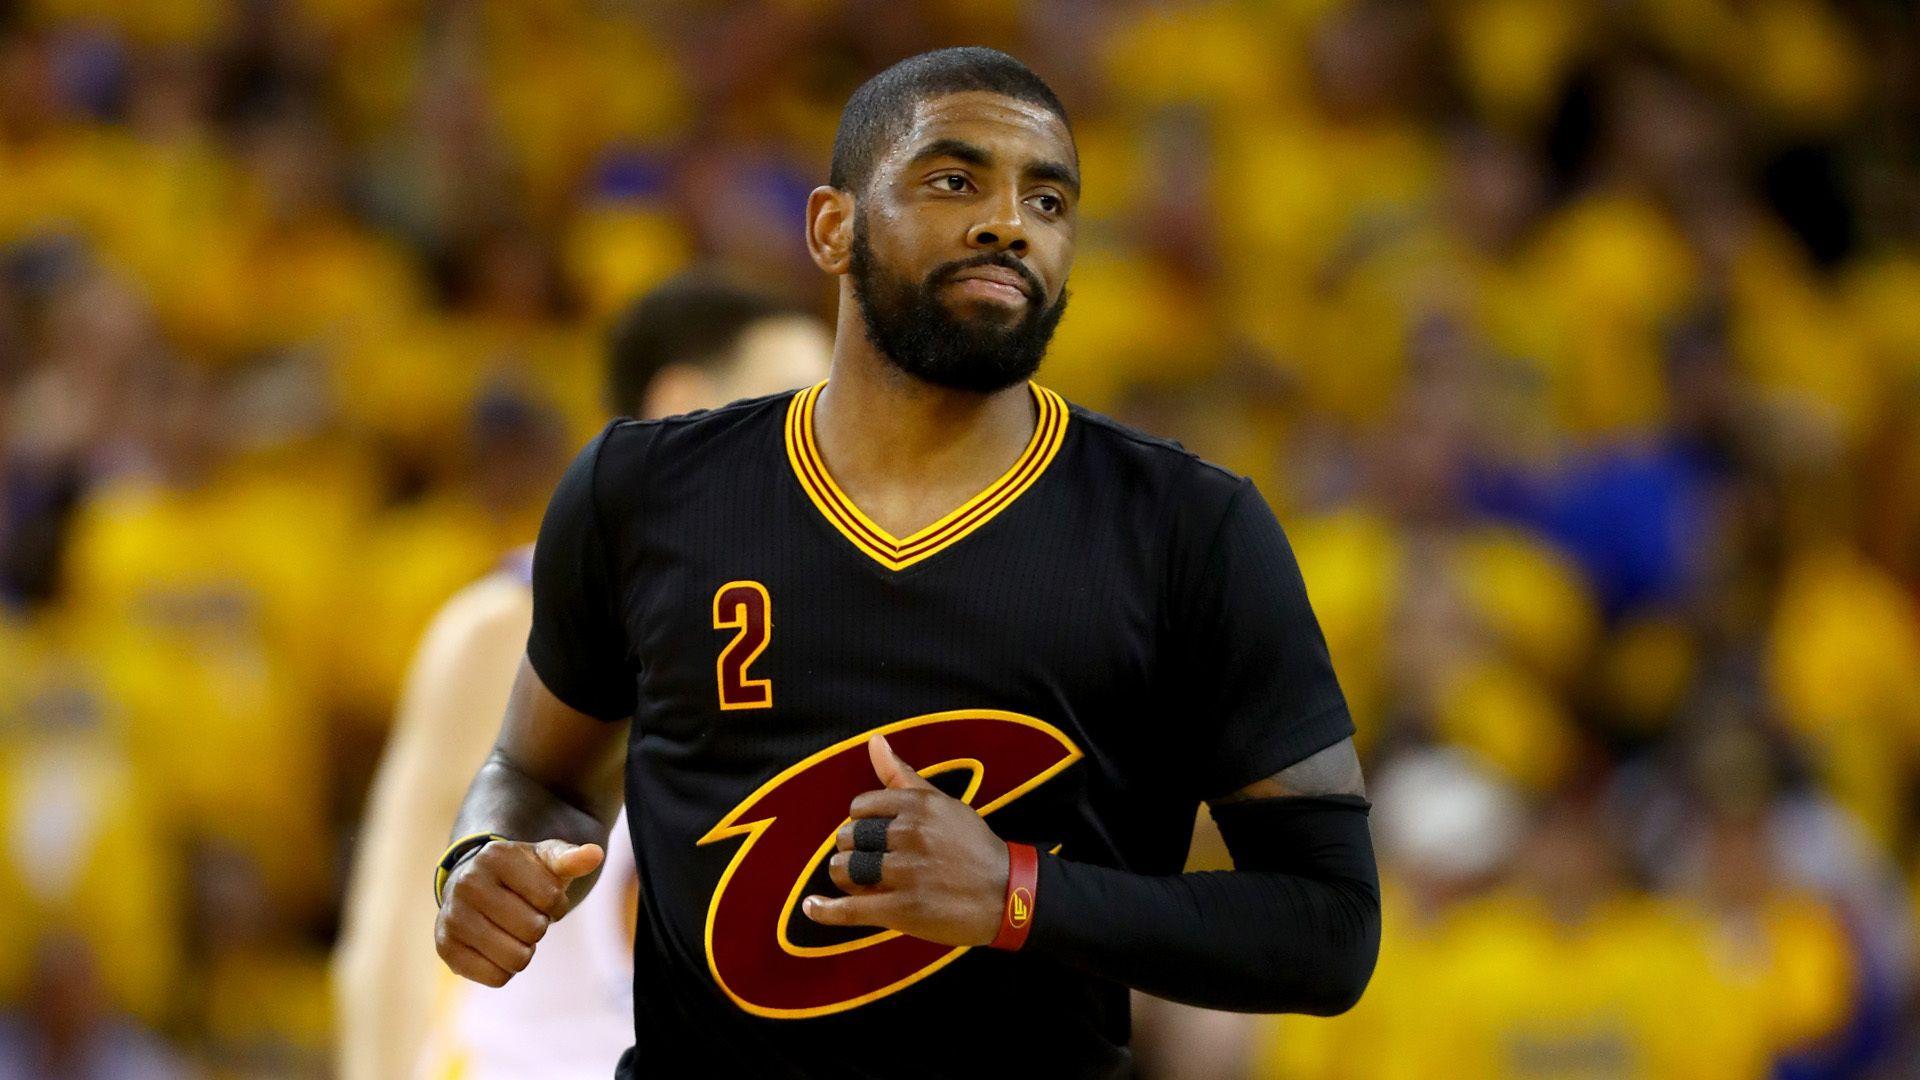 Kyrie Irving Wallpaper Image Photo Picture Background